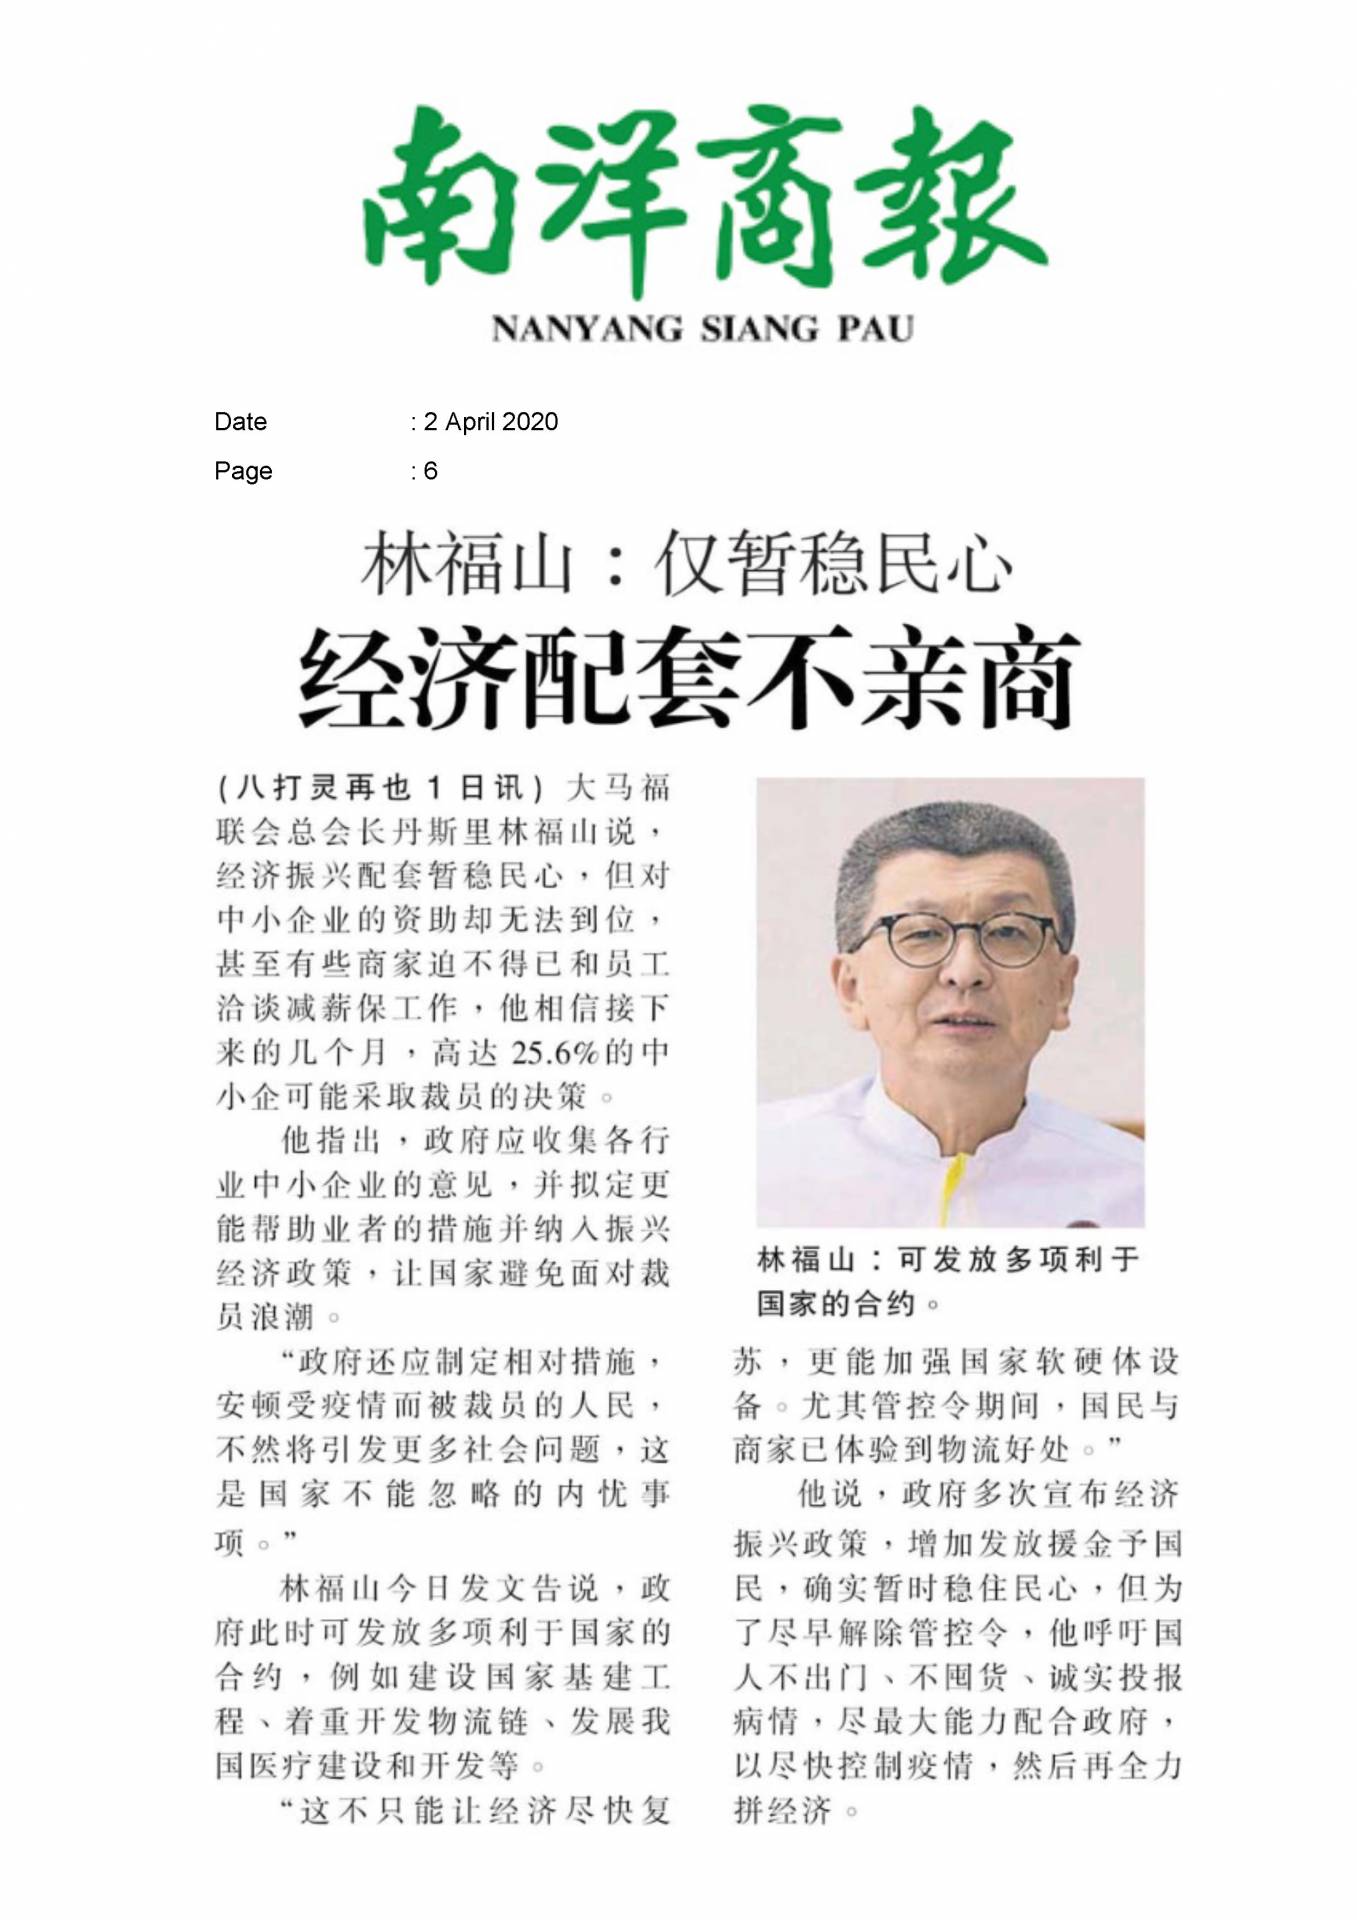 2020.04.02 Nanyang - Lim Hock San said economic package is not pro-business